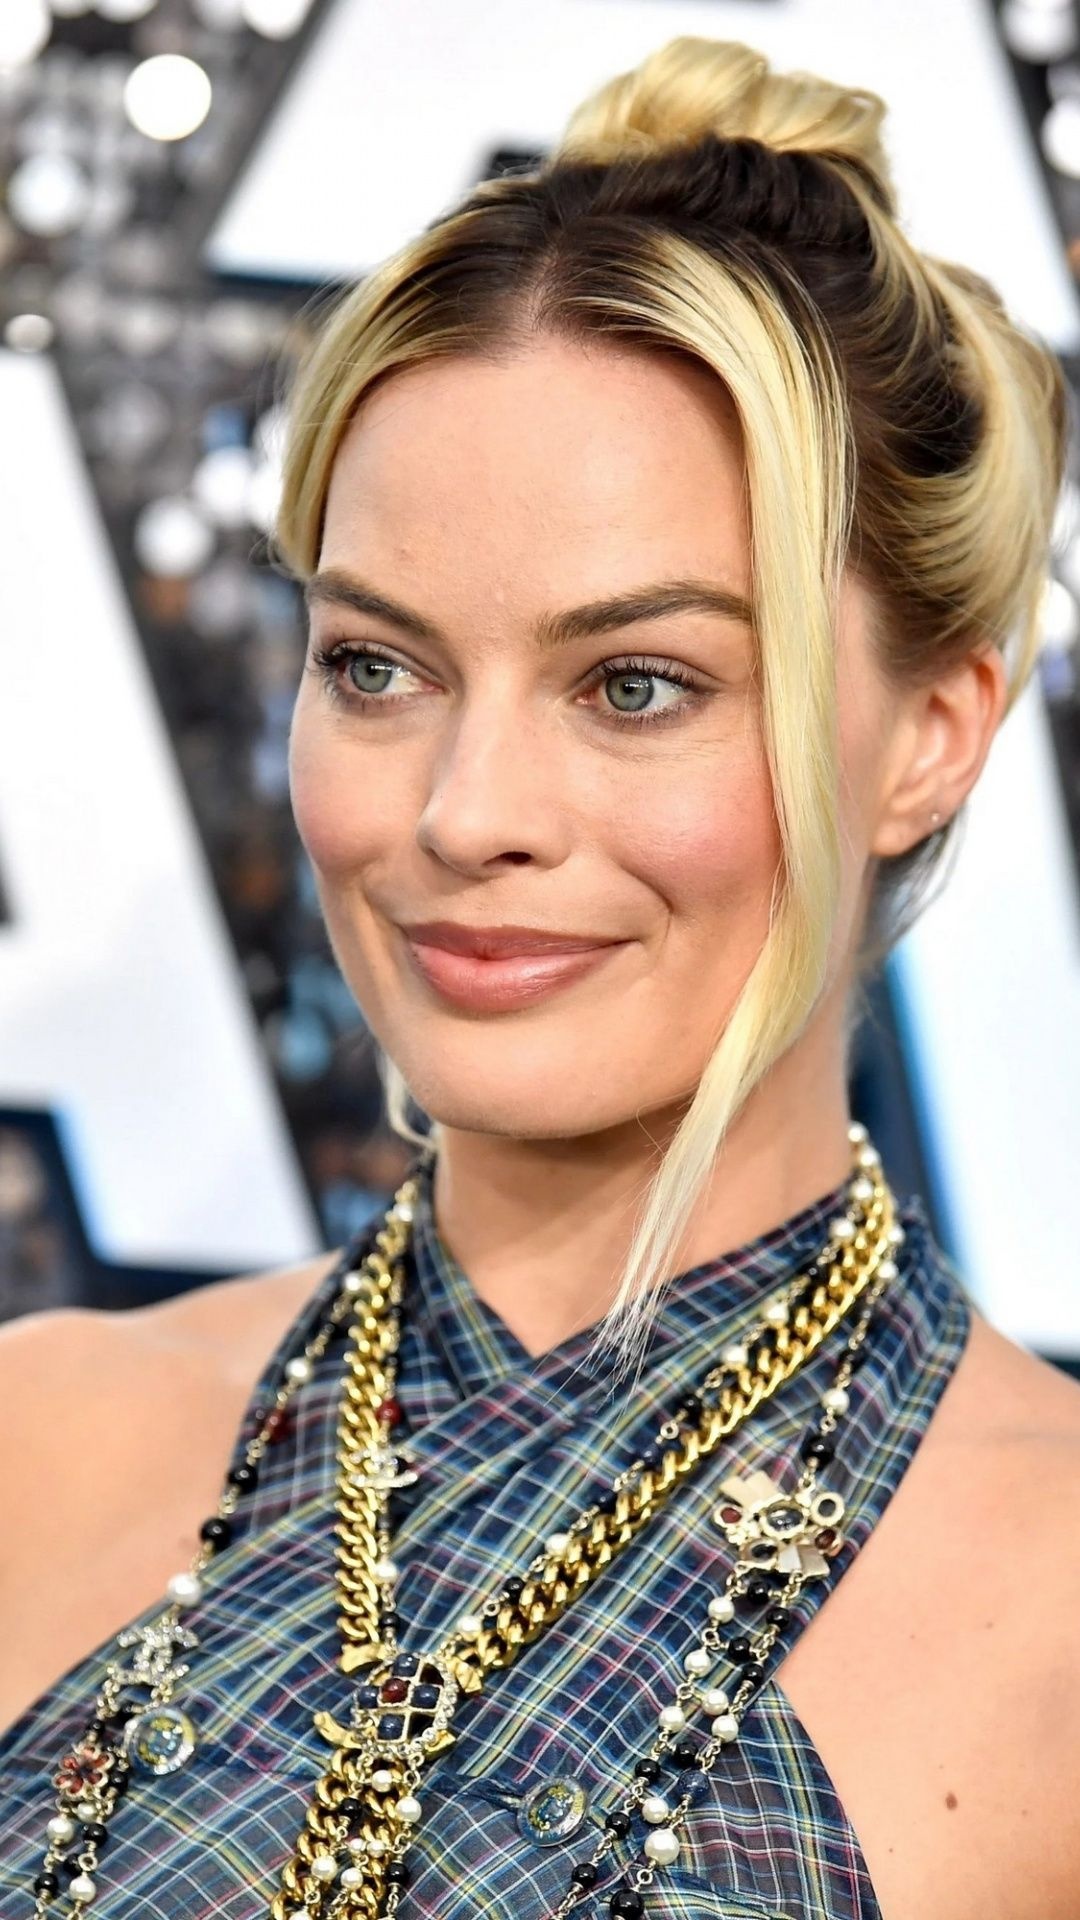 Margot Robbie: An Australian actress best known for her roles in 'The Wolf of Wall Street,' 'Suicide Squad' and 'I, Tonya'. 1080x1920 Full HD Wallpaper.